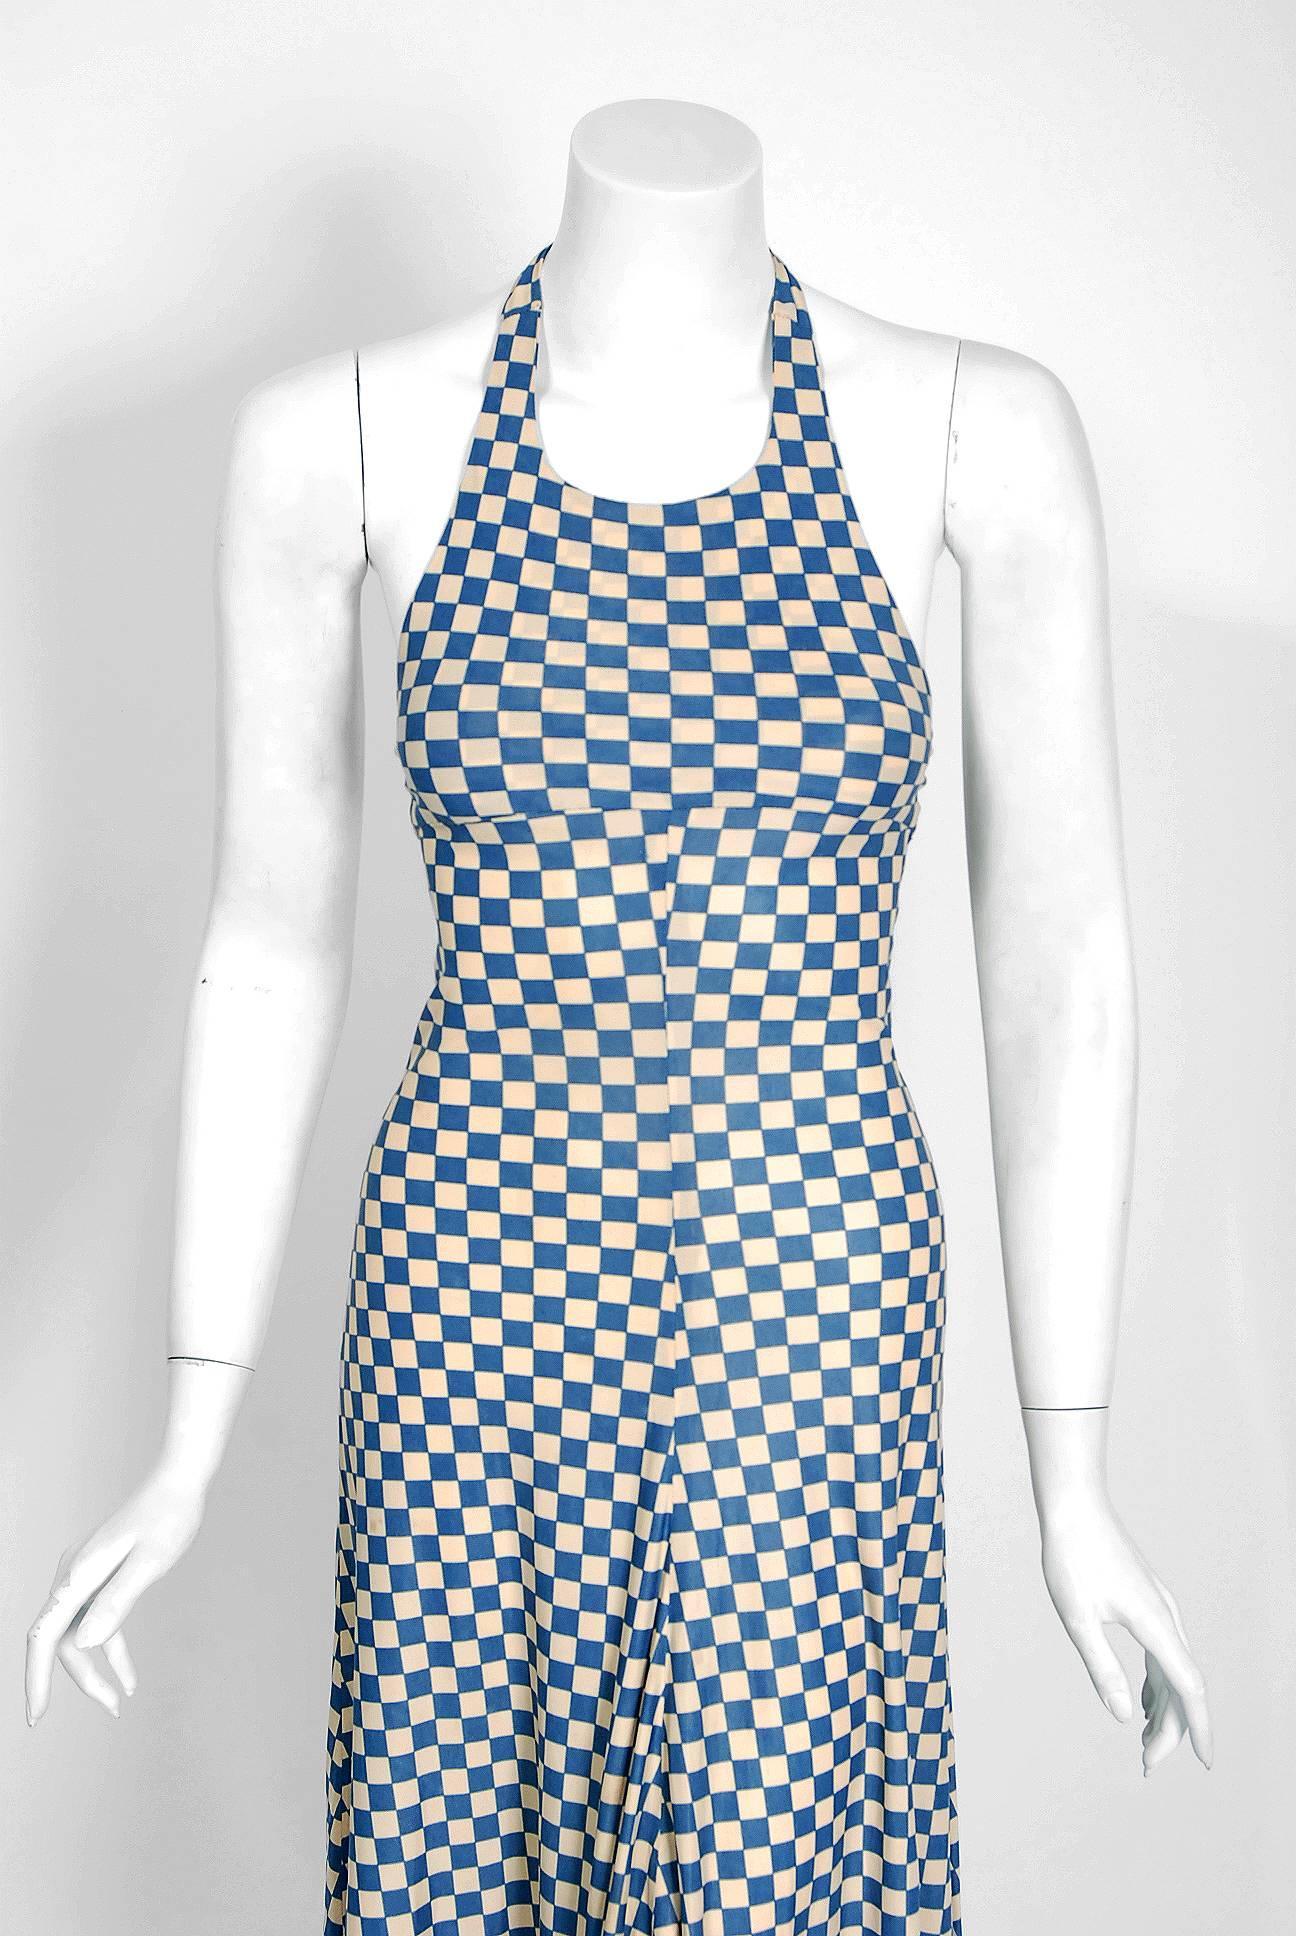 If you were an “It Girl” in London during the 1960's and 1970's, Biba is where you would have shopped. This beautiful blue and ivory checkered print dress is a perfect example of the brand's genius. It is an easy-to-wear jersey blend with all the